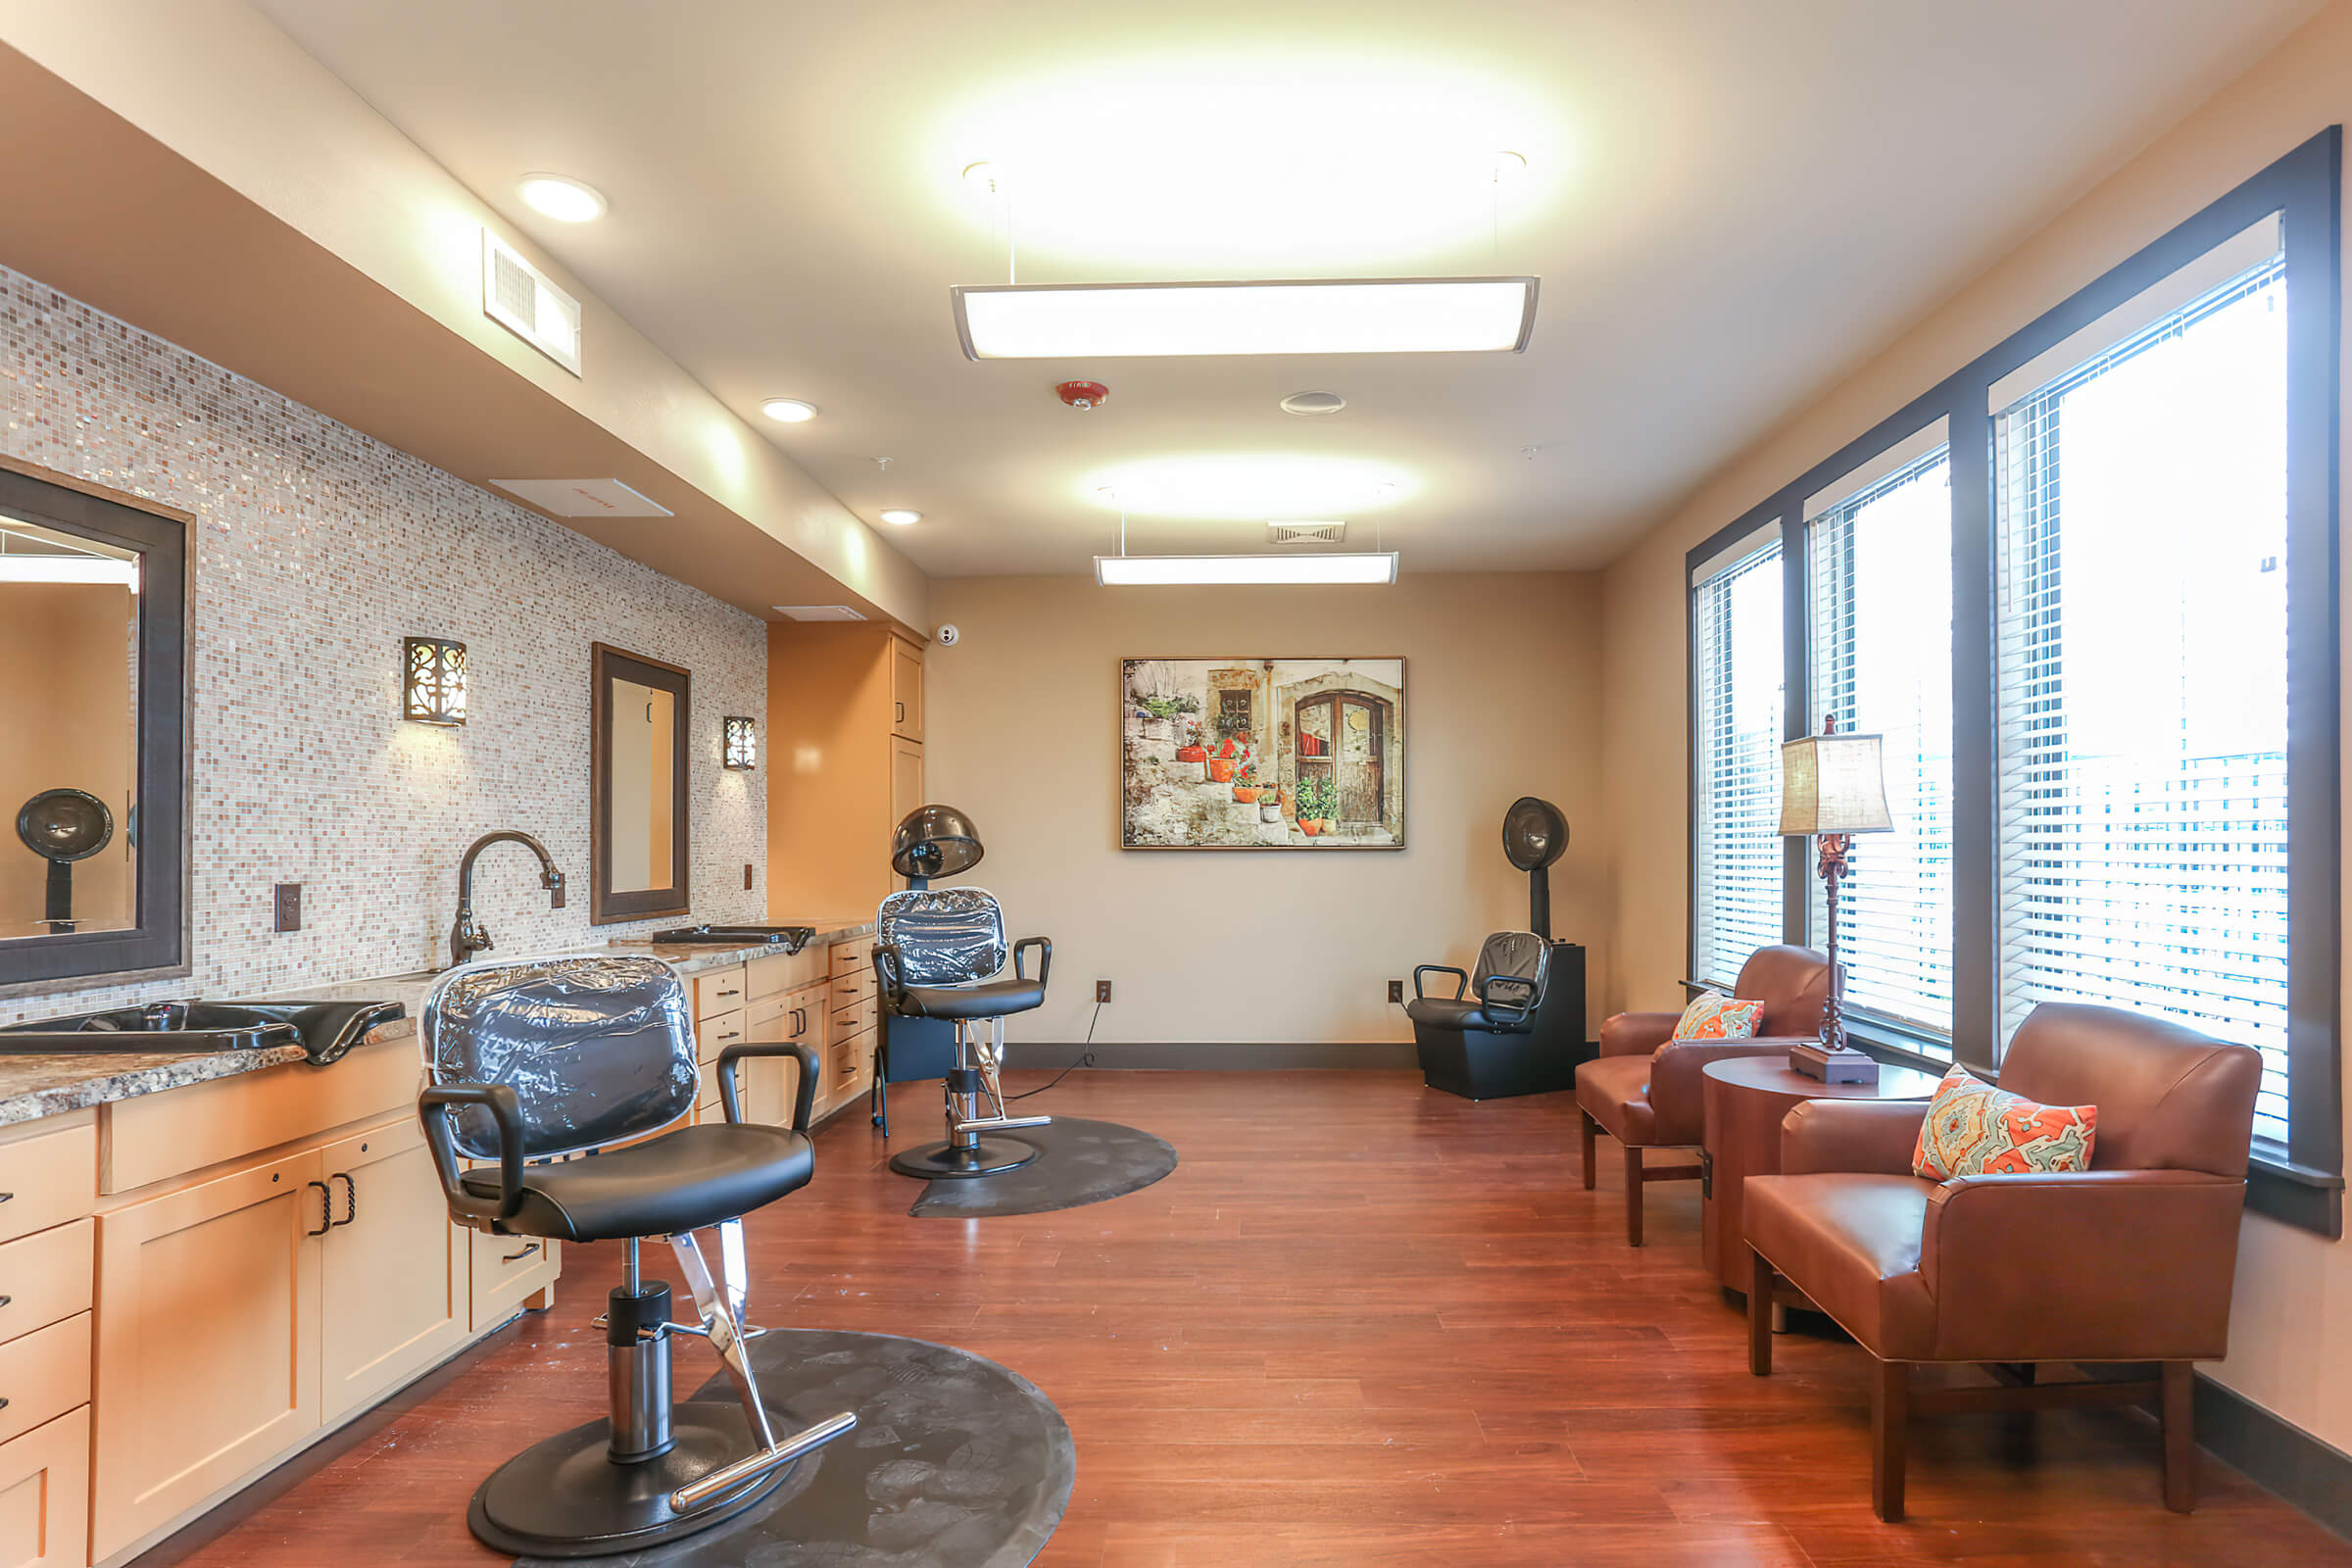 Stay Looking Chic with the Beauty and Barber Salon